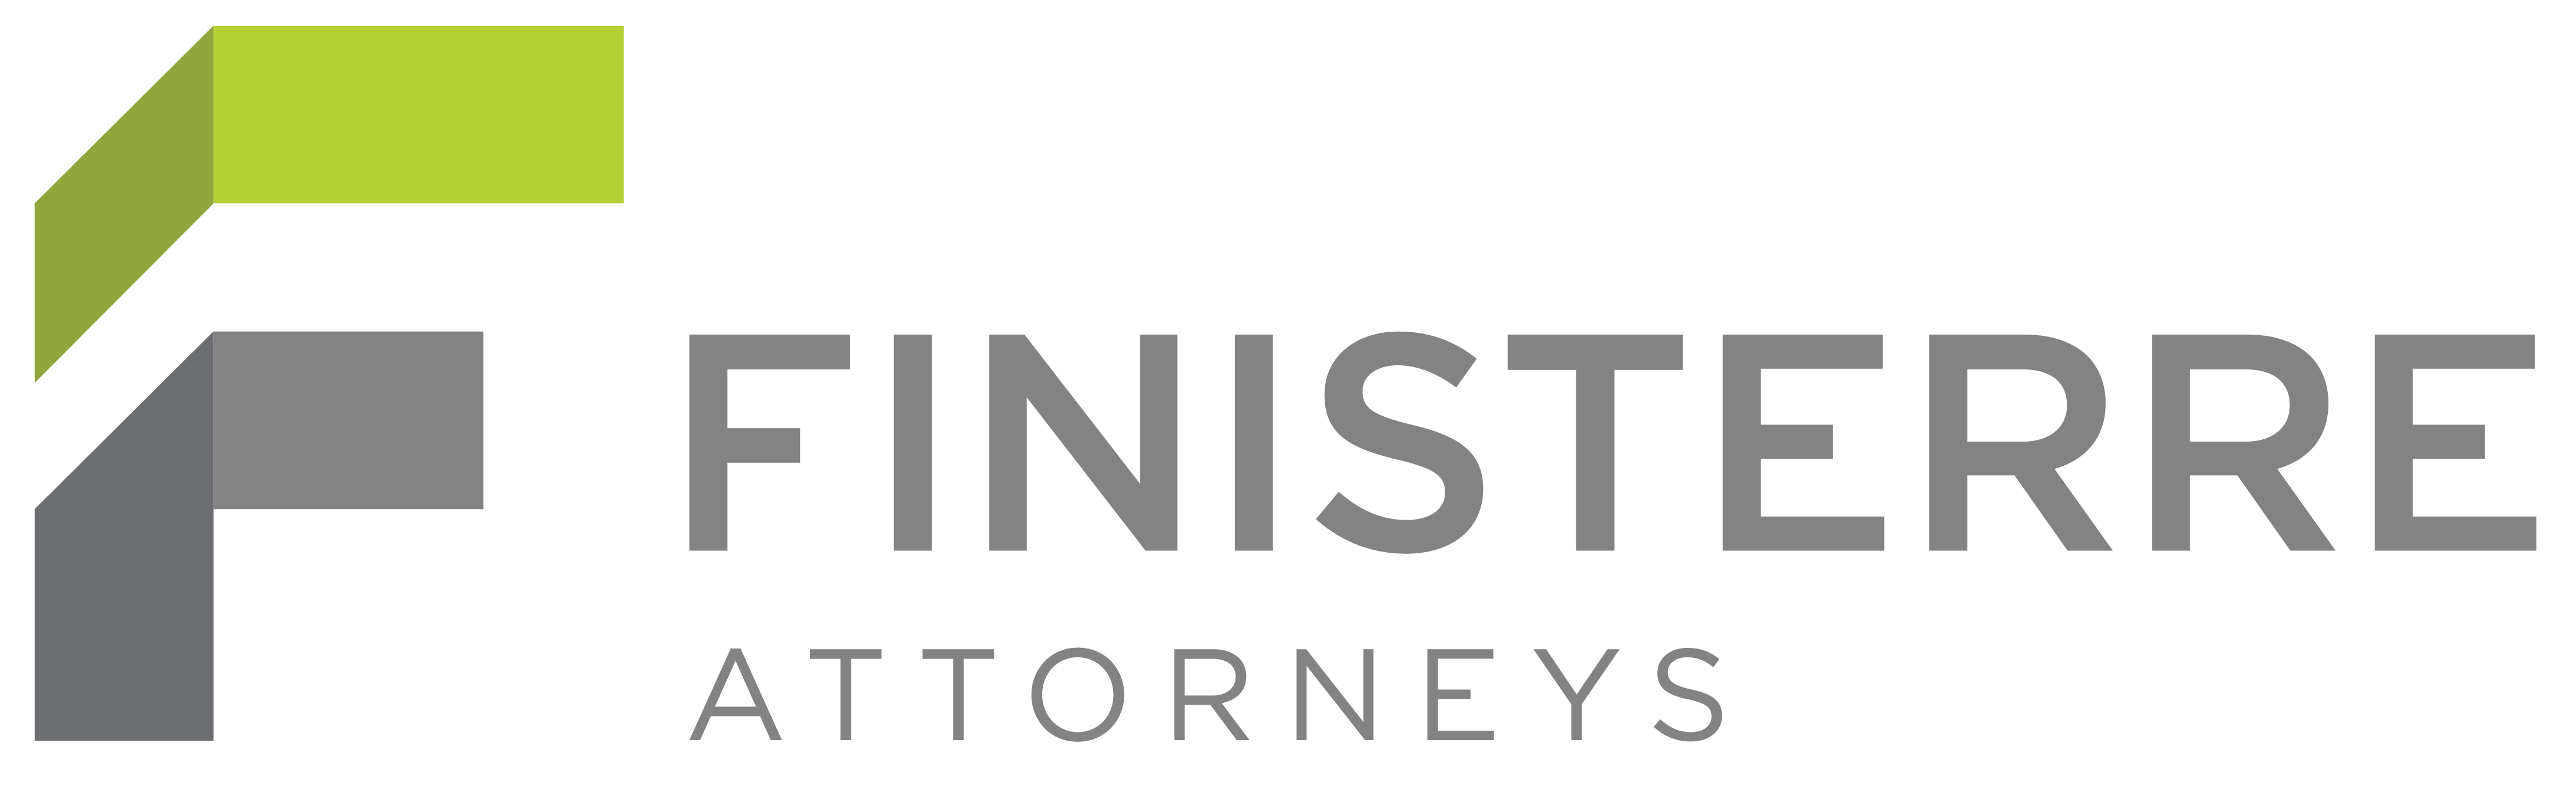 Finisterre Attorneys